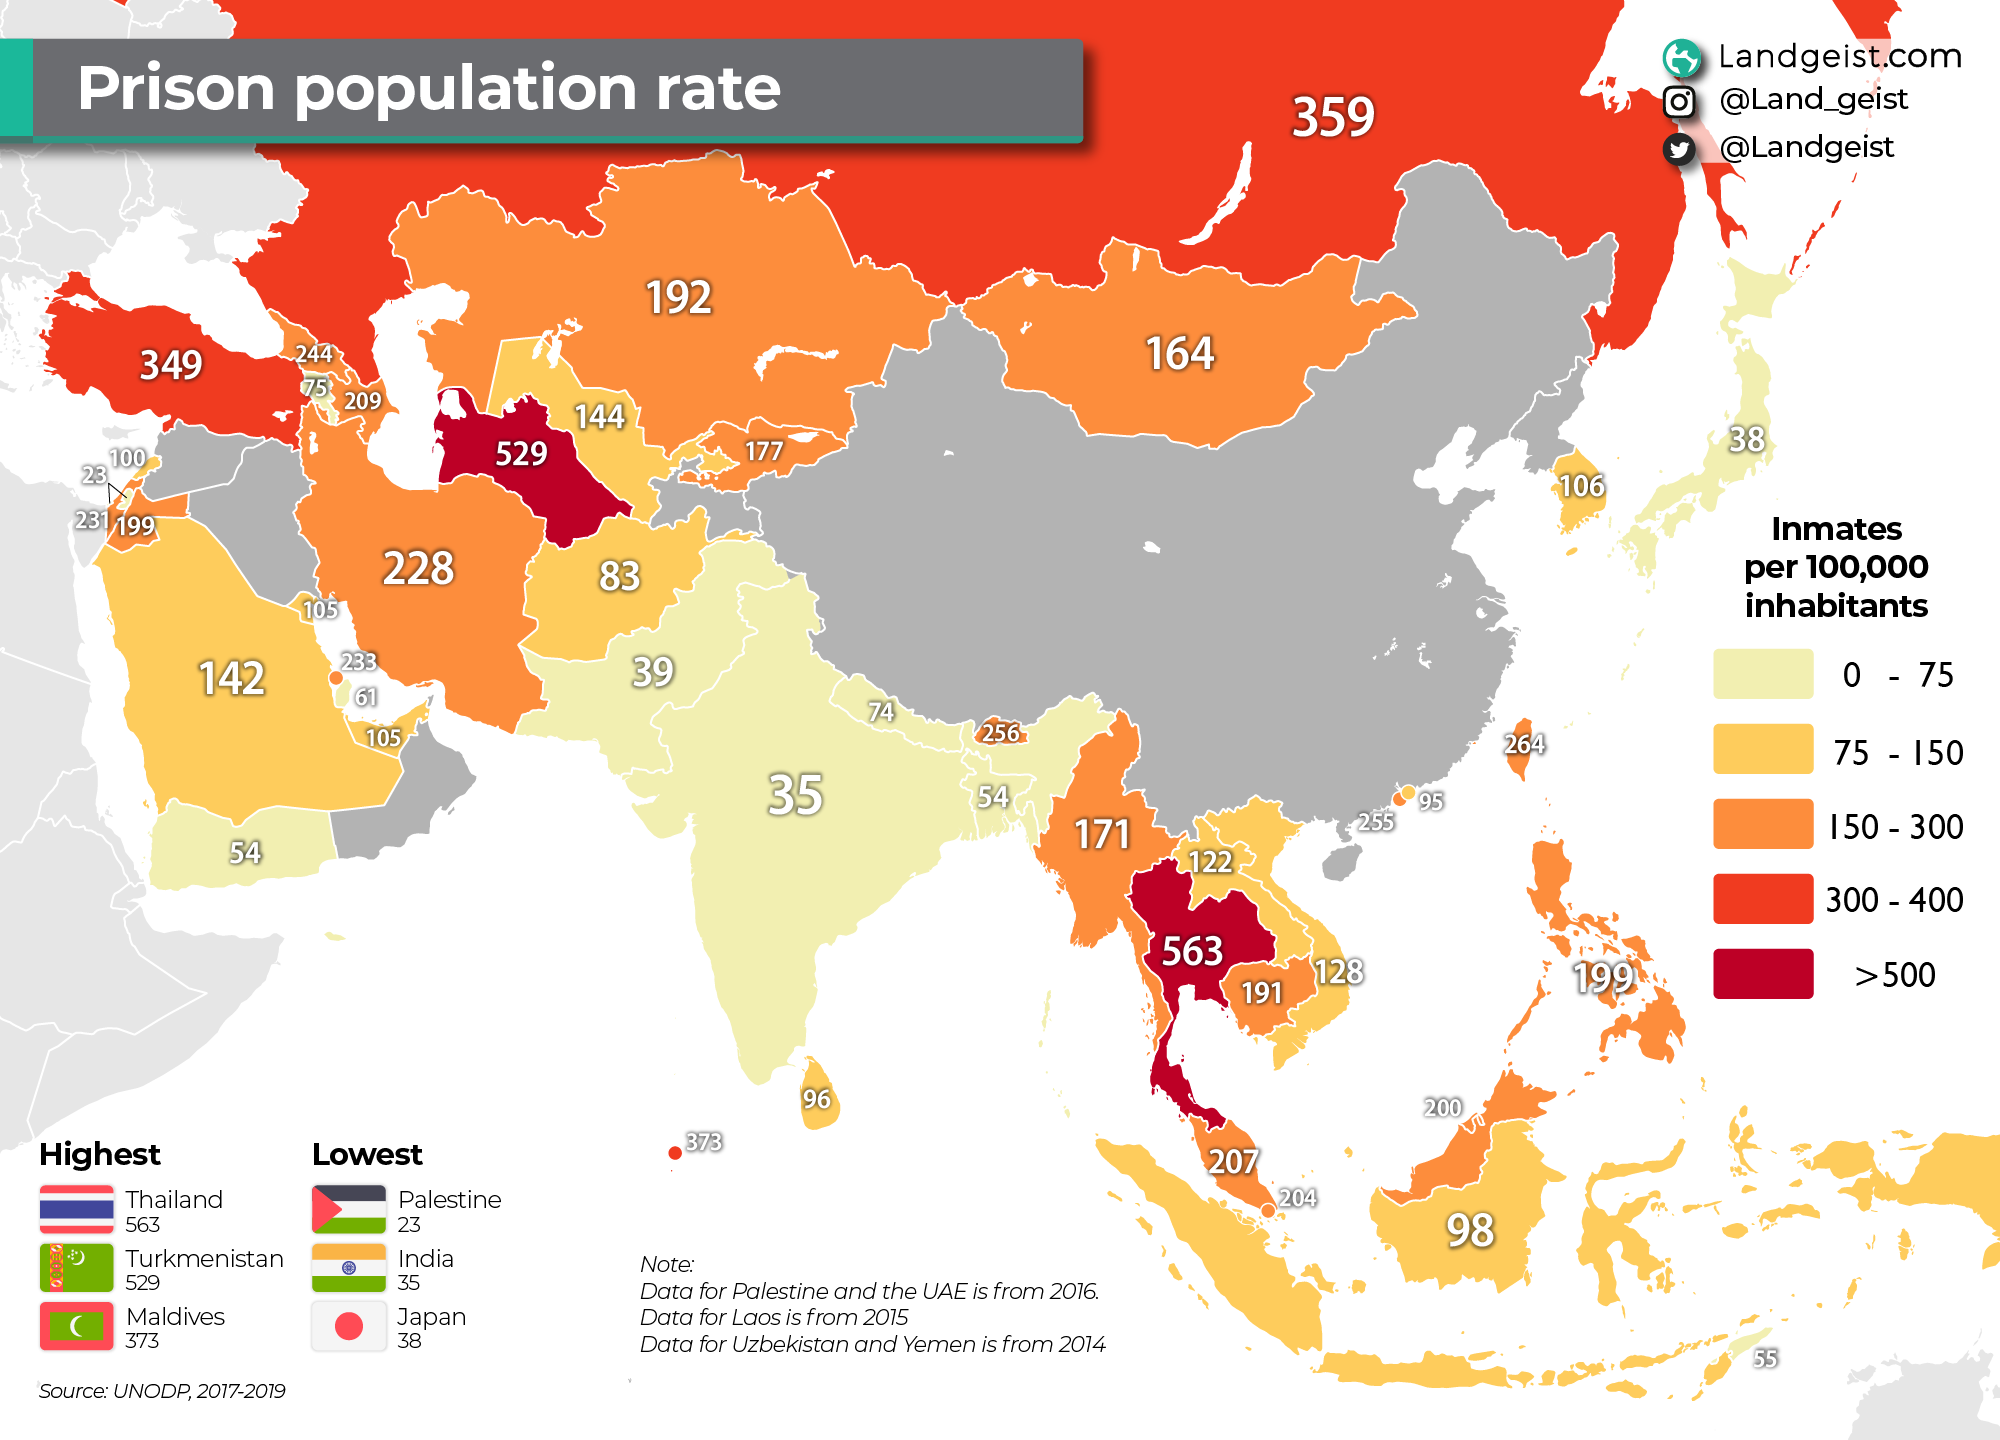 Map of the prison population rate in Asia.